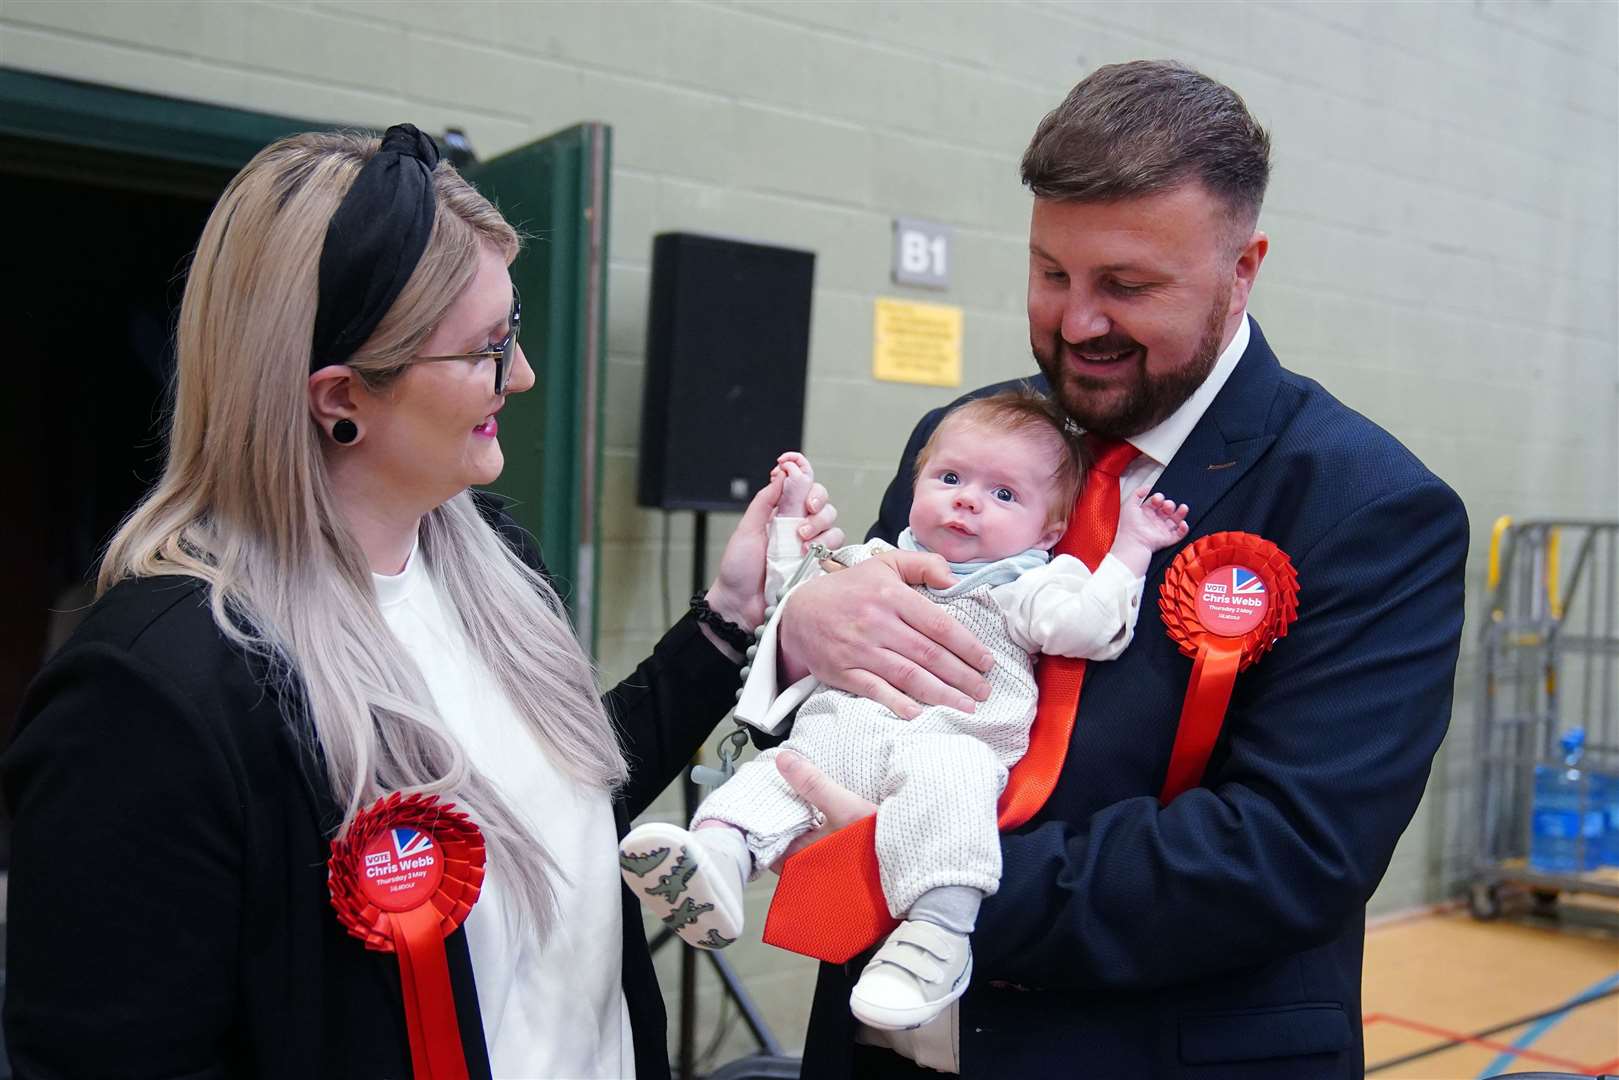 Labour candidate Chris Webb celebrates with his wife Portia and baby Cillian Douglas Webb after winning the Blackpool South by-election (Peter Byrne/PA)